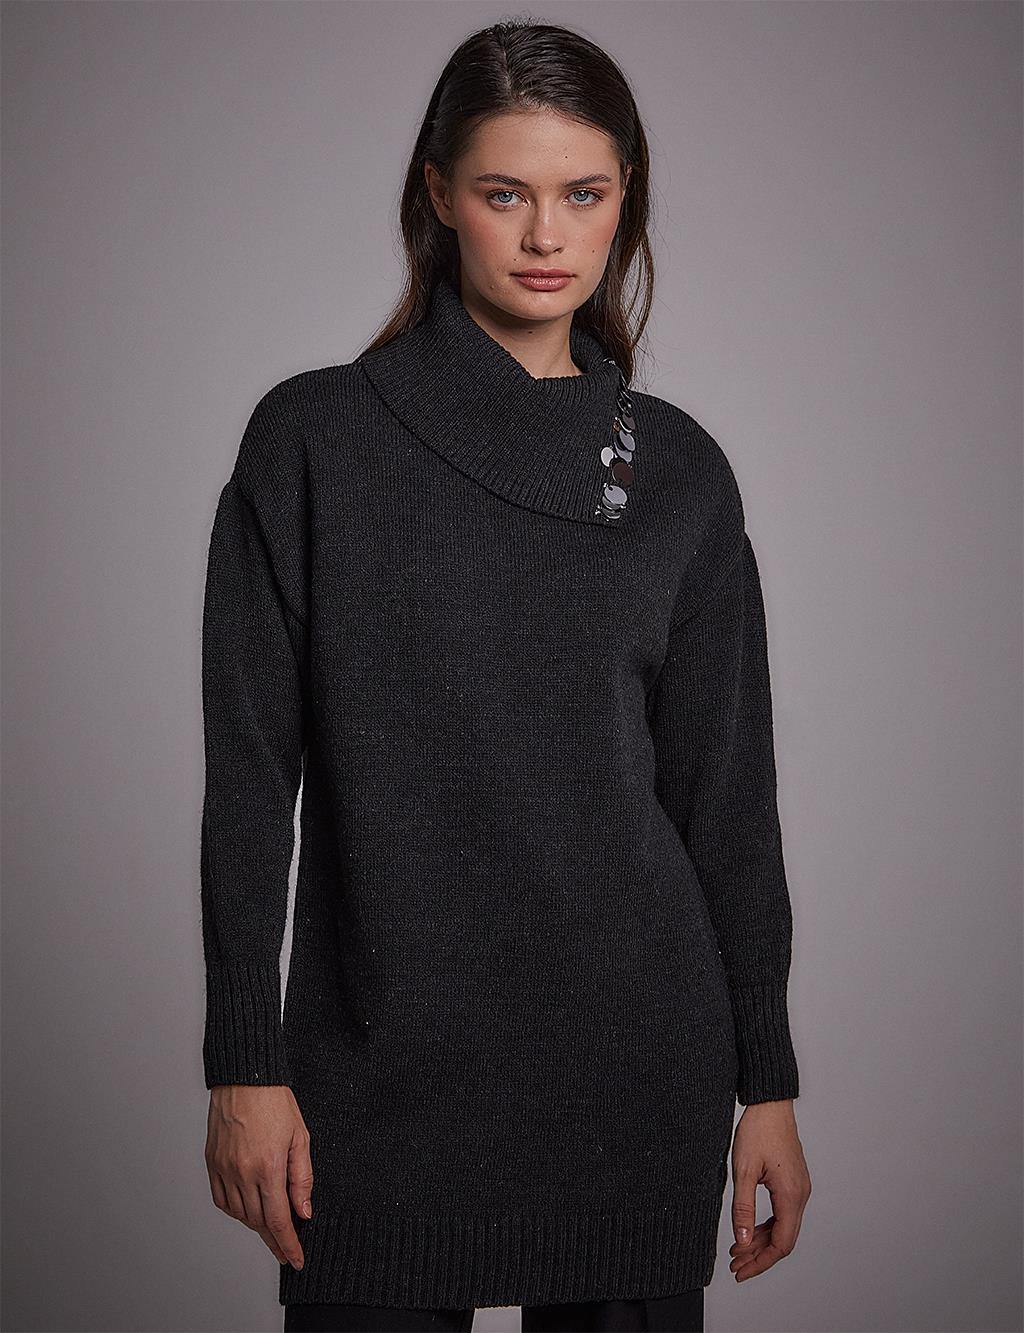 Sequin Detailed Knitwear Tunic Black